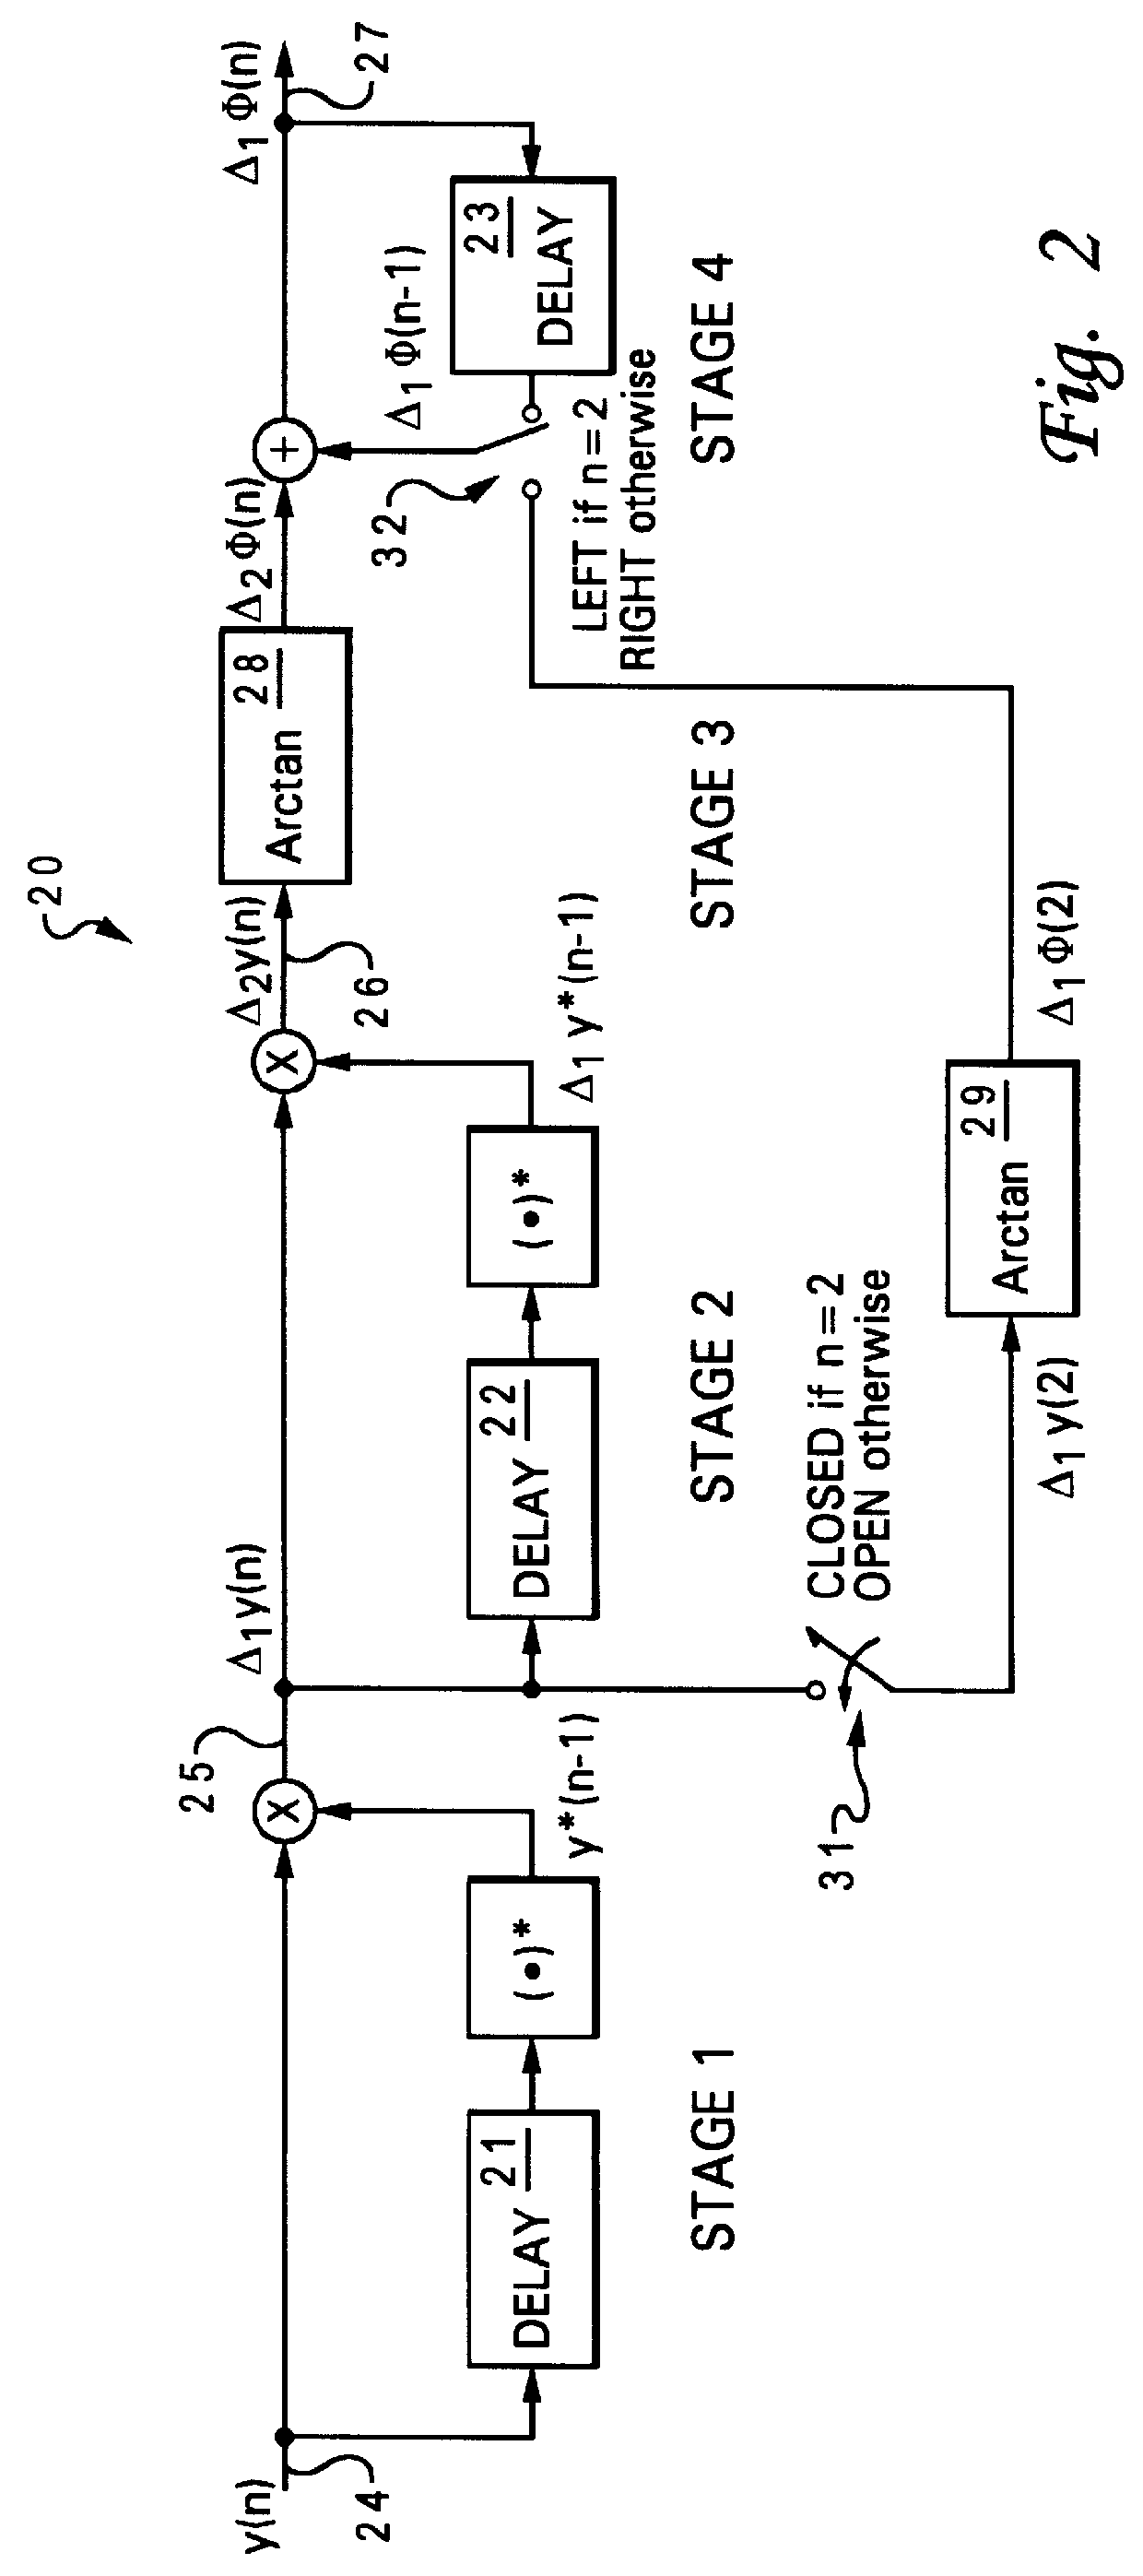 Method and apparatus for demodulating digital frequency modulation (FM) signals